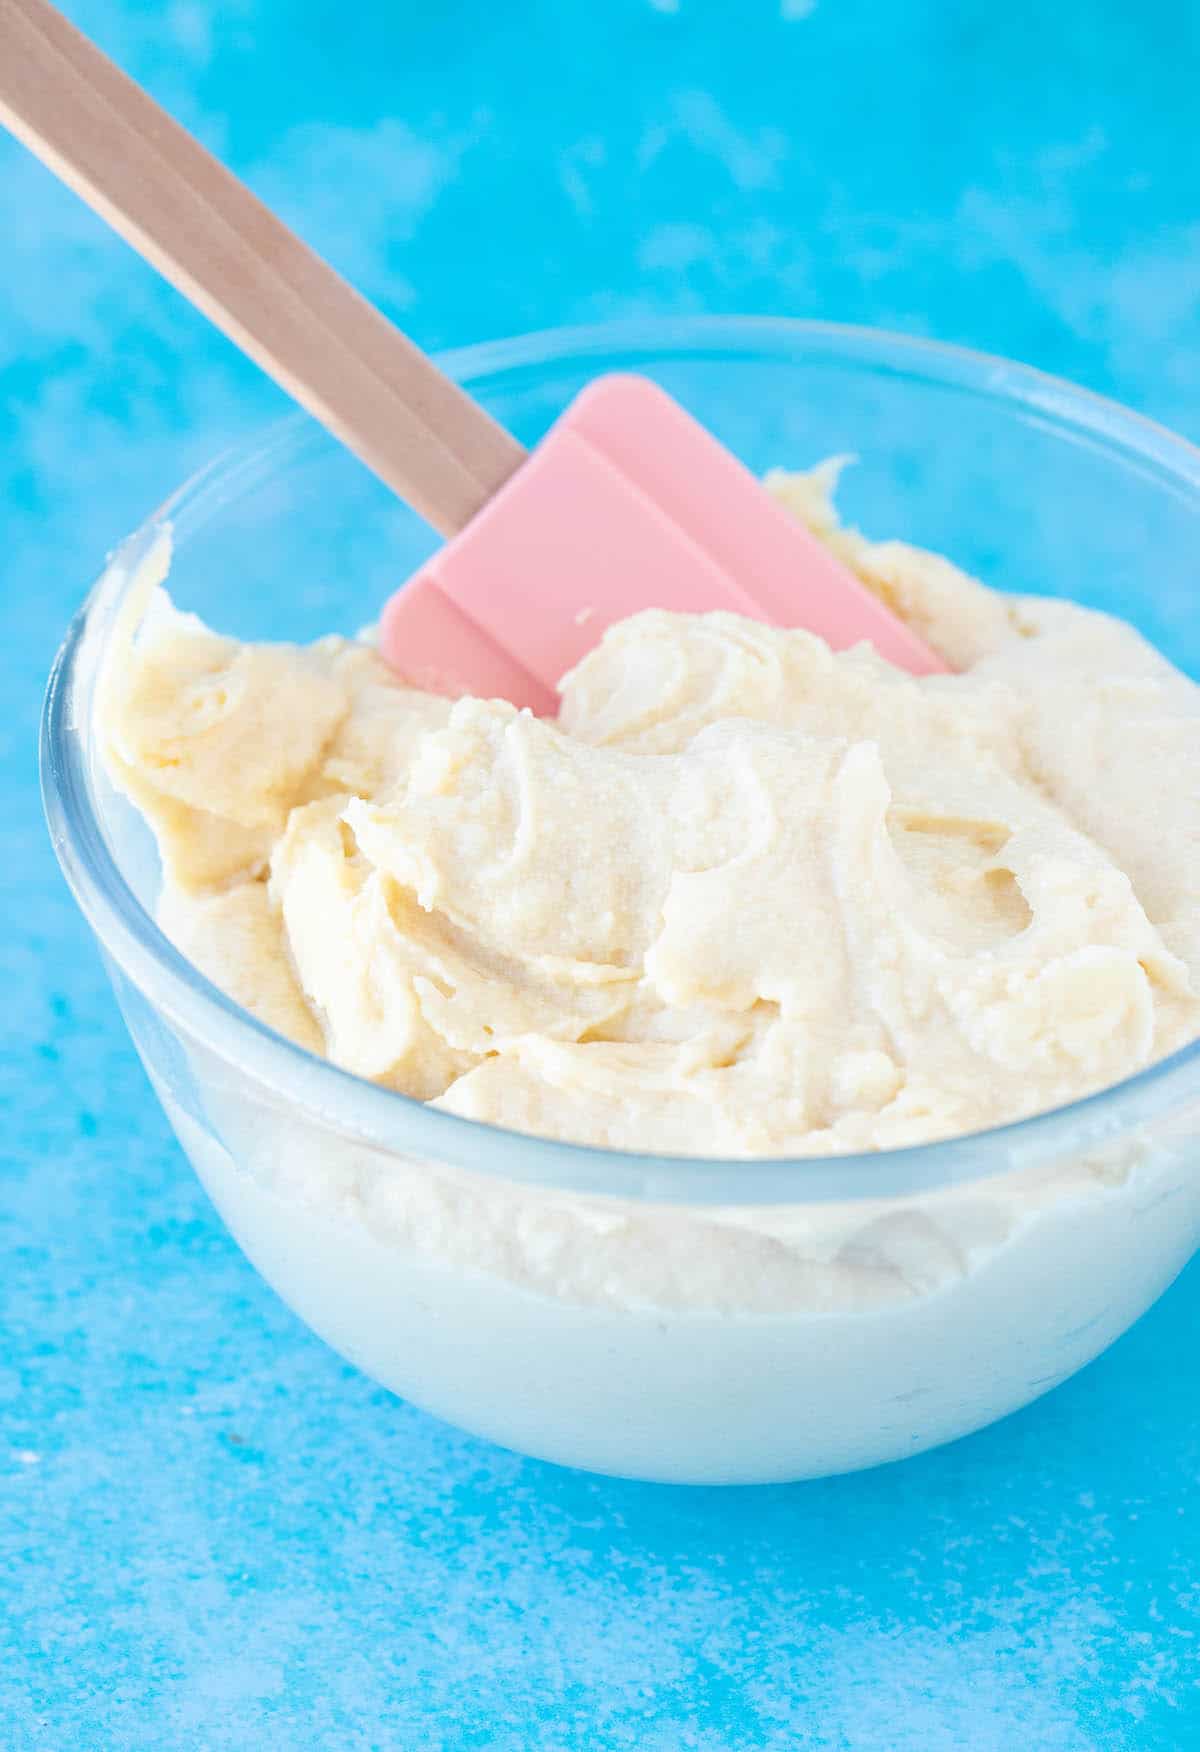 A glass bowl full of thick and creamy cake batter